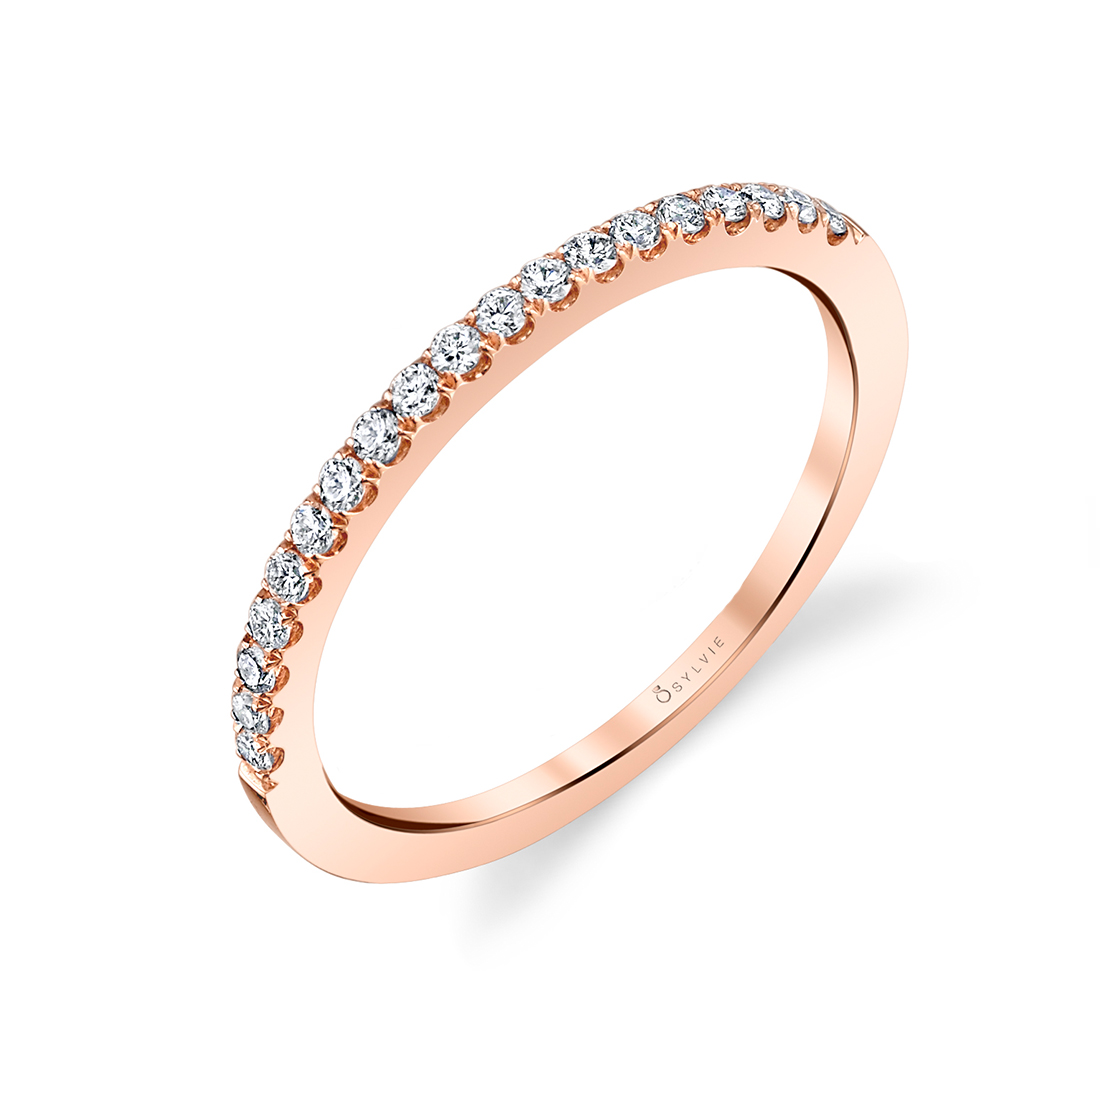 Classic Wedding band in rose gold by Sylvie 